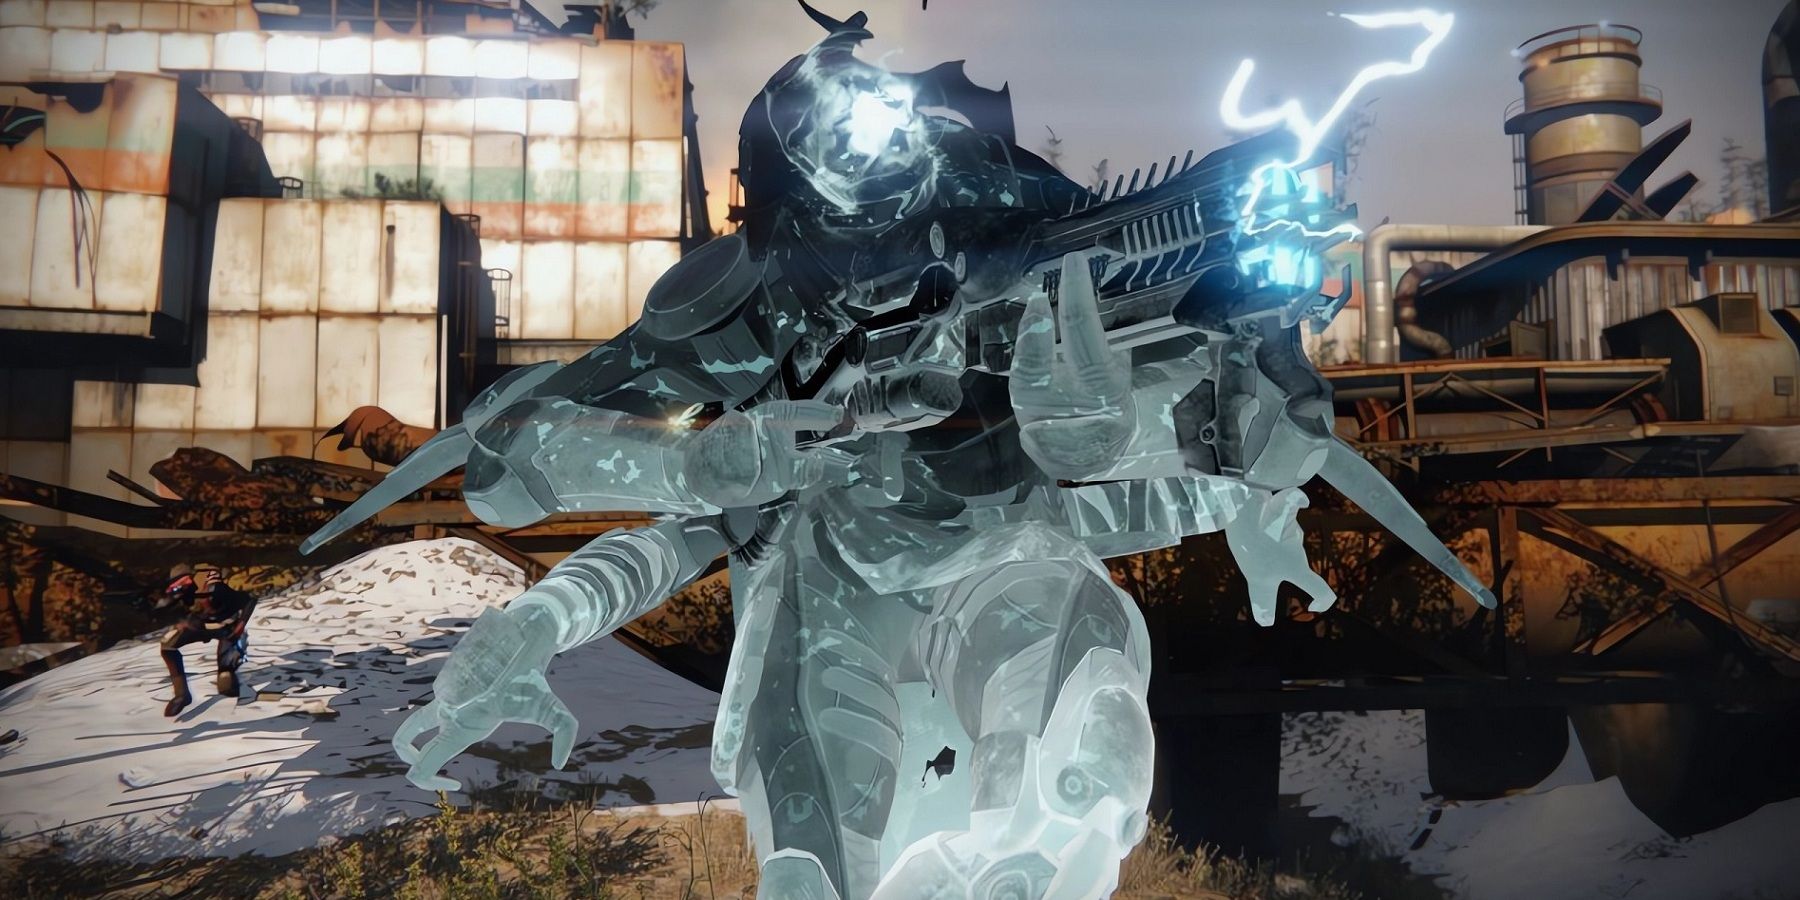 Destiny 2 Datamining Reveals Unannounced Sets of Lightfall
Weapons and Armor